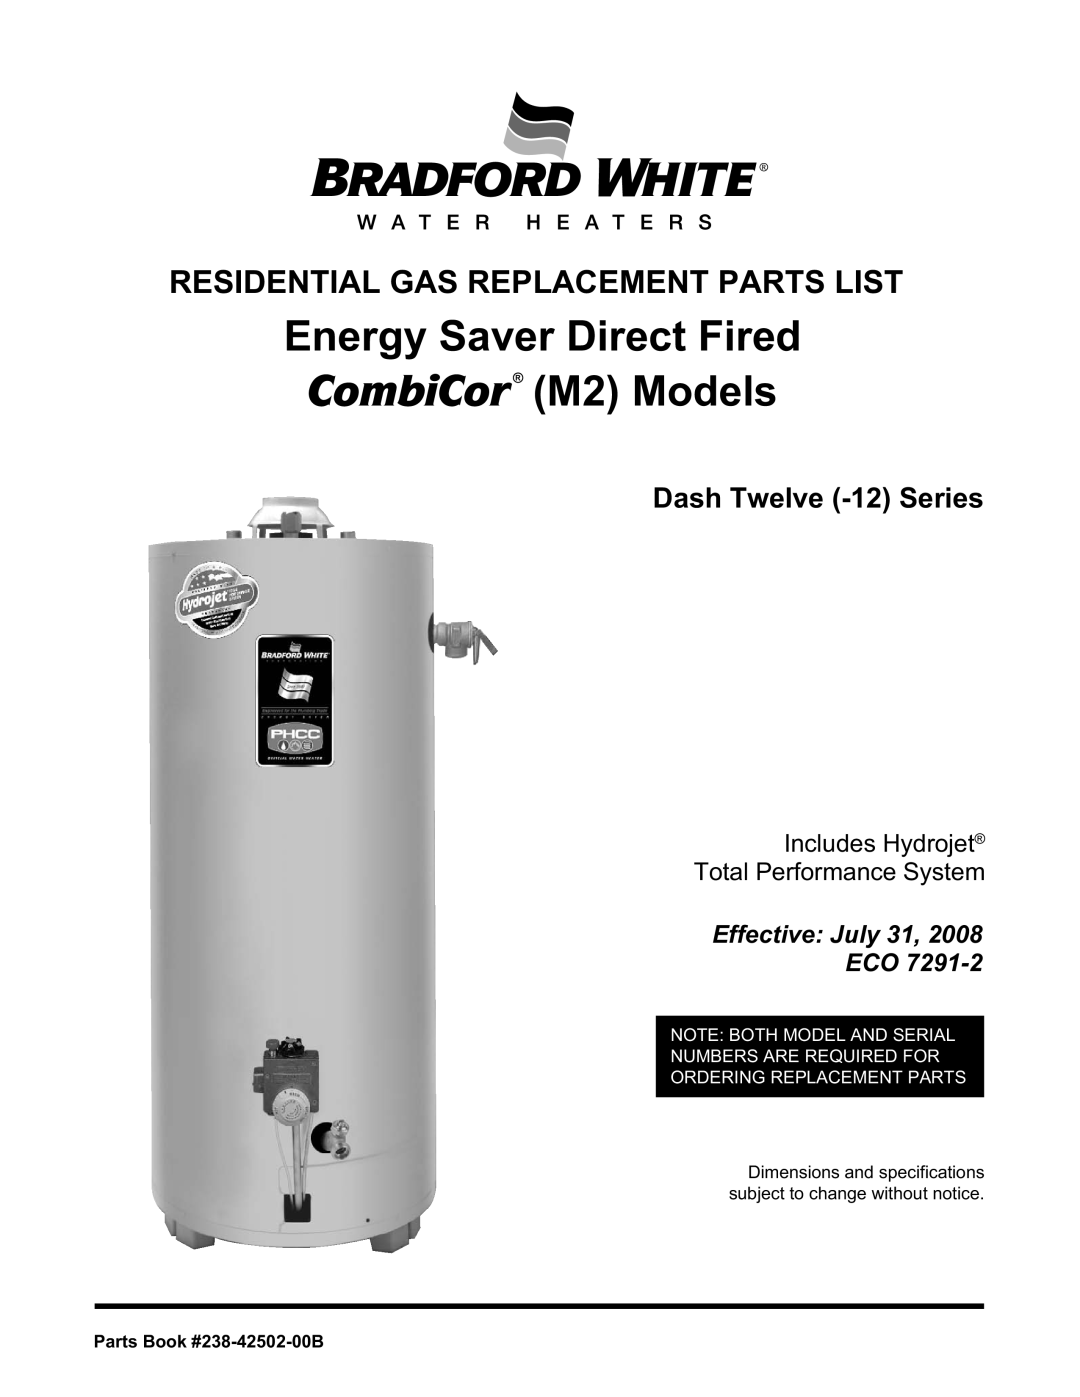 Bradford-White Corp EN)-12 dimensions Energy Saver Direct Fired CombiCor M2 Models, Residential Gas Replacement Parts List 